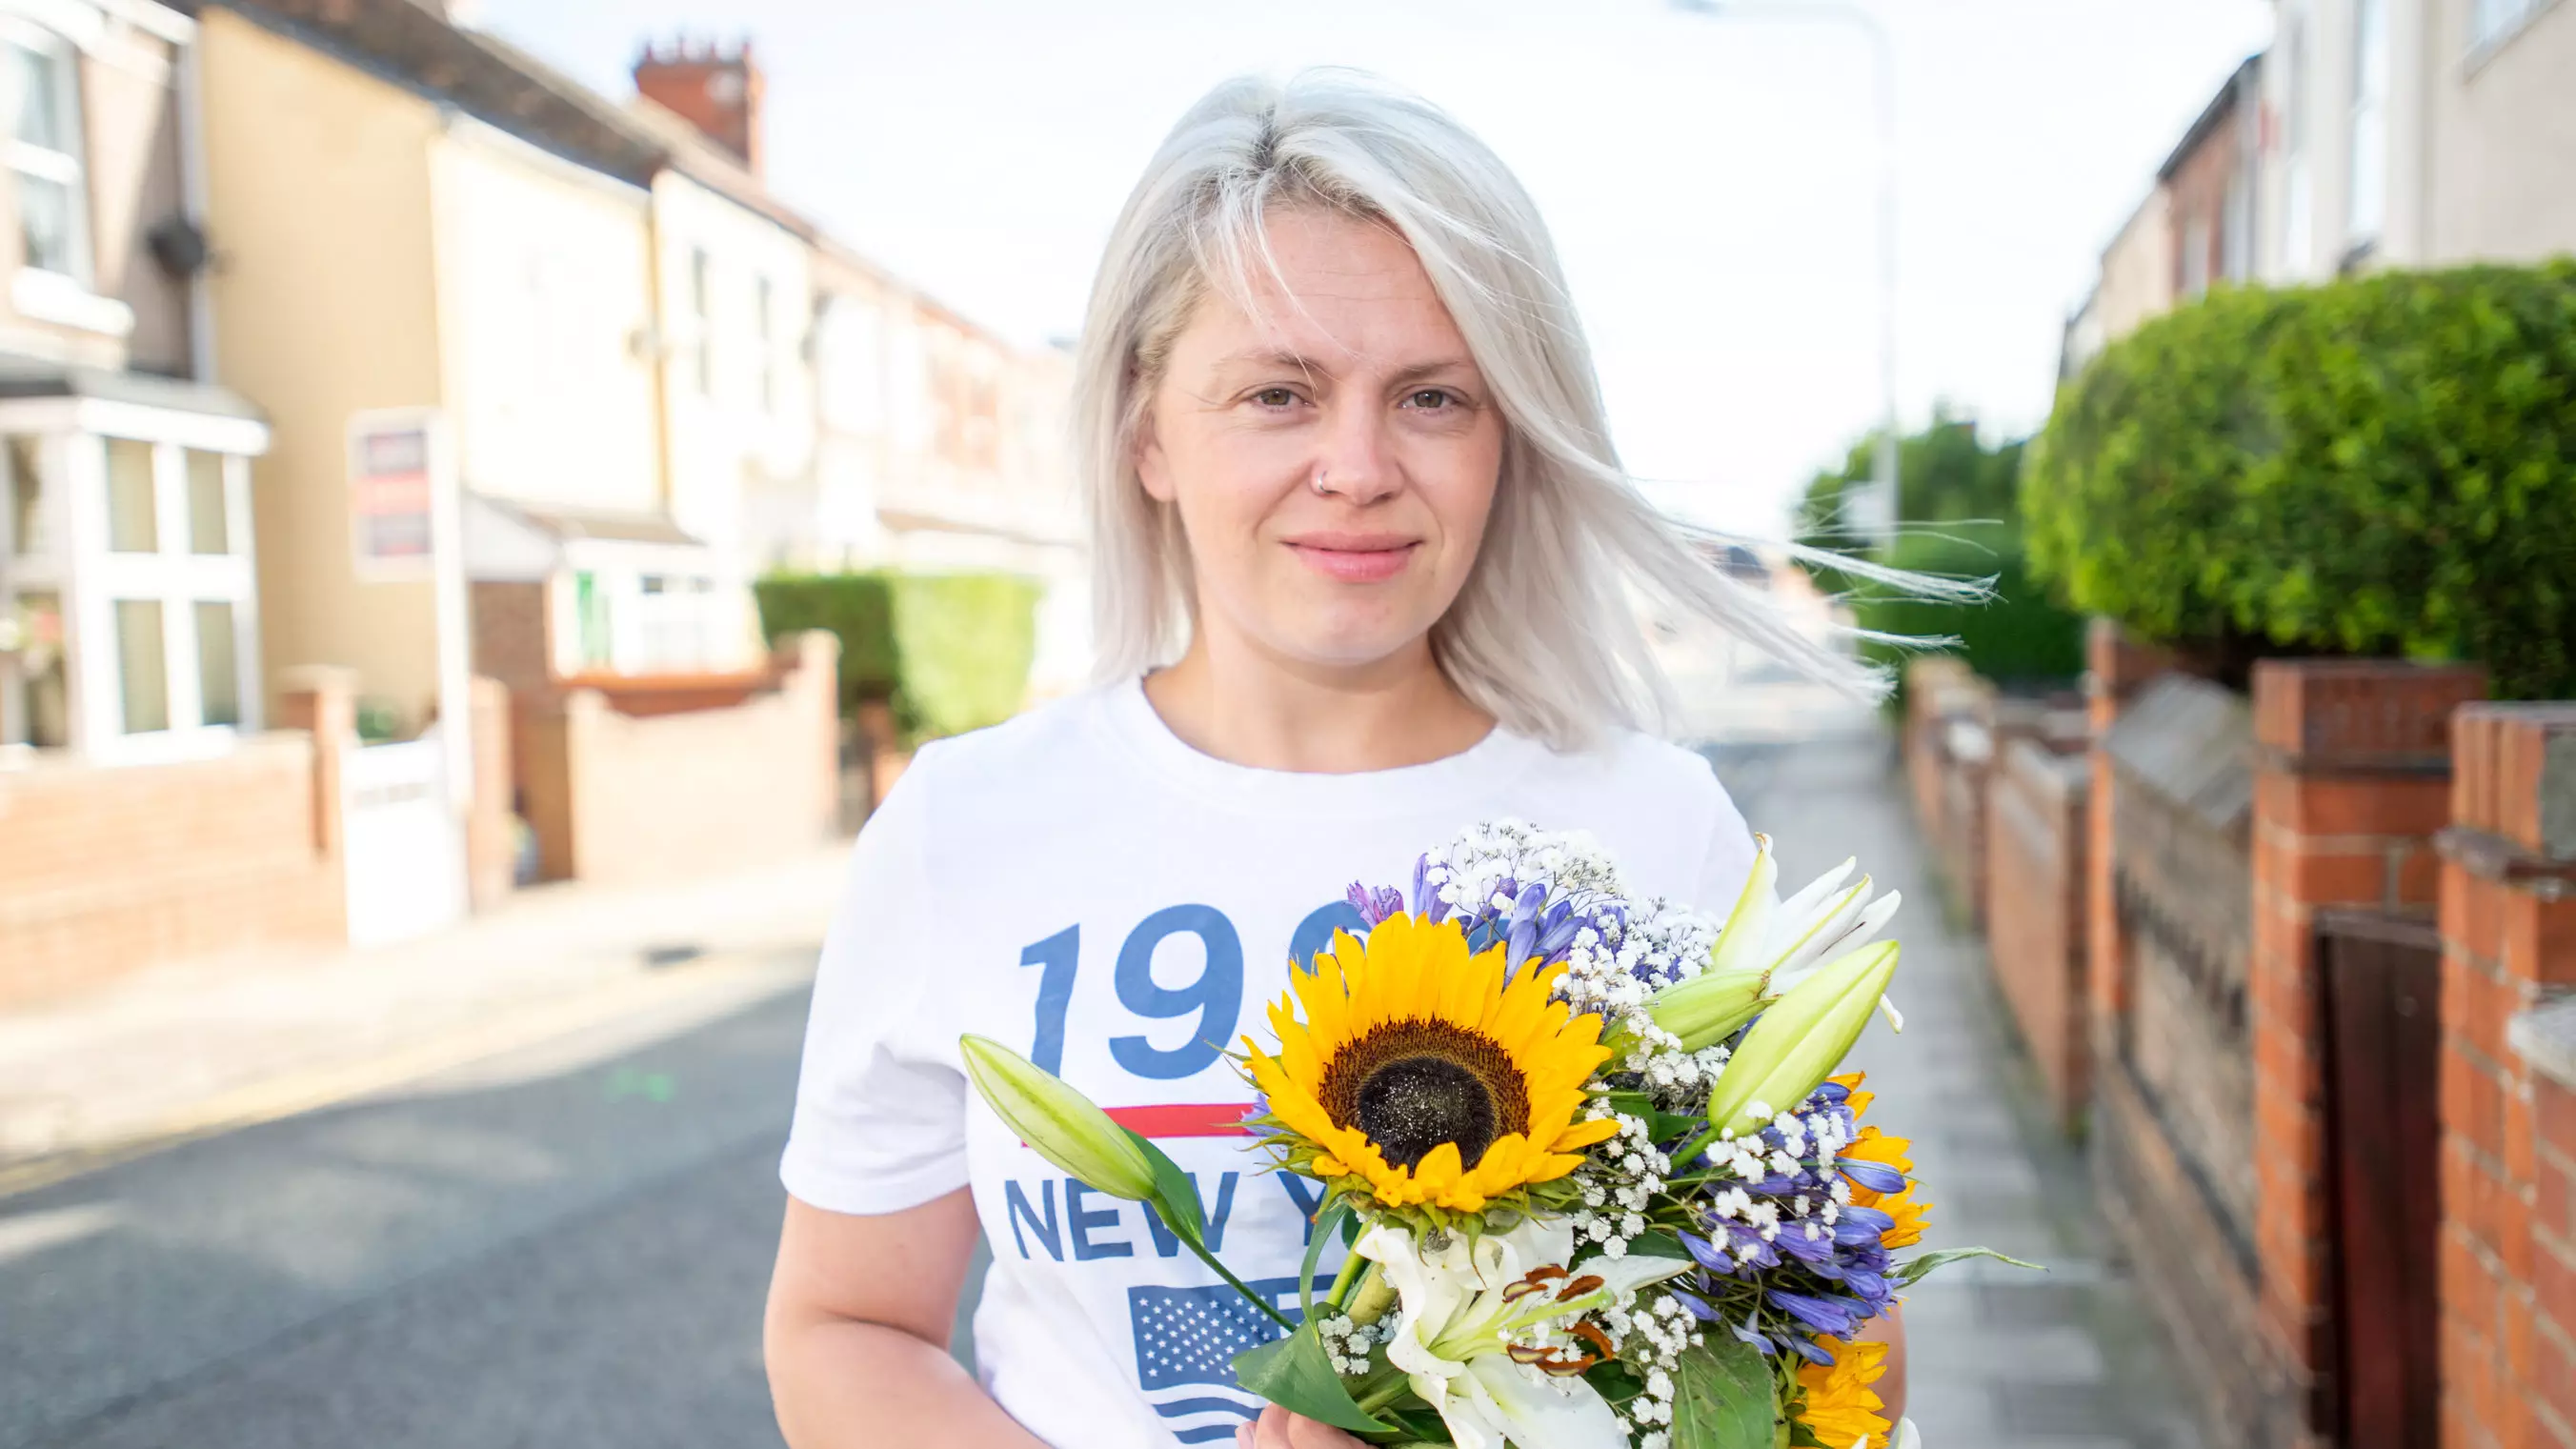 Woman Gives Out Flowers To Strangers In The Street In Her Mother's Memory